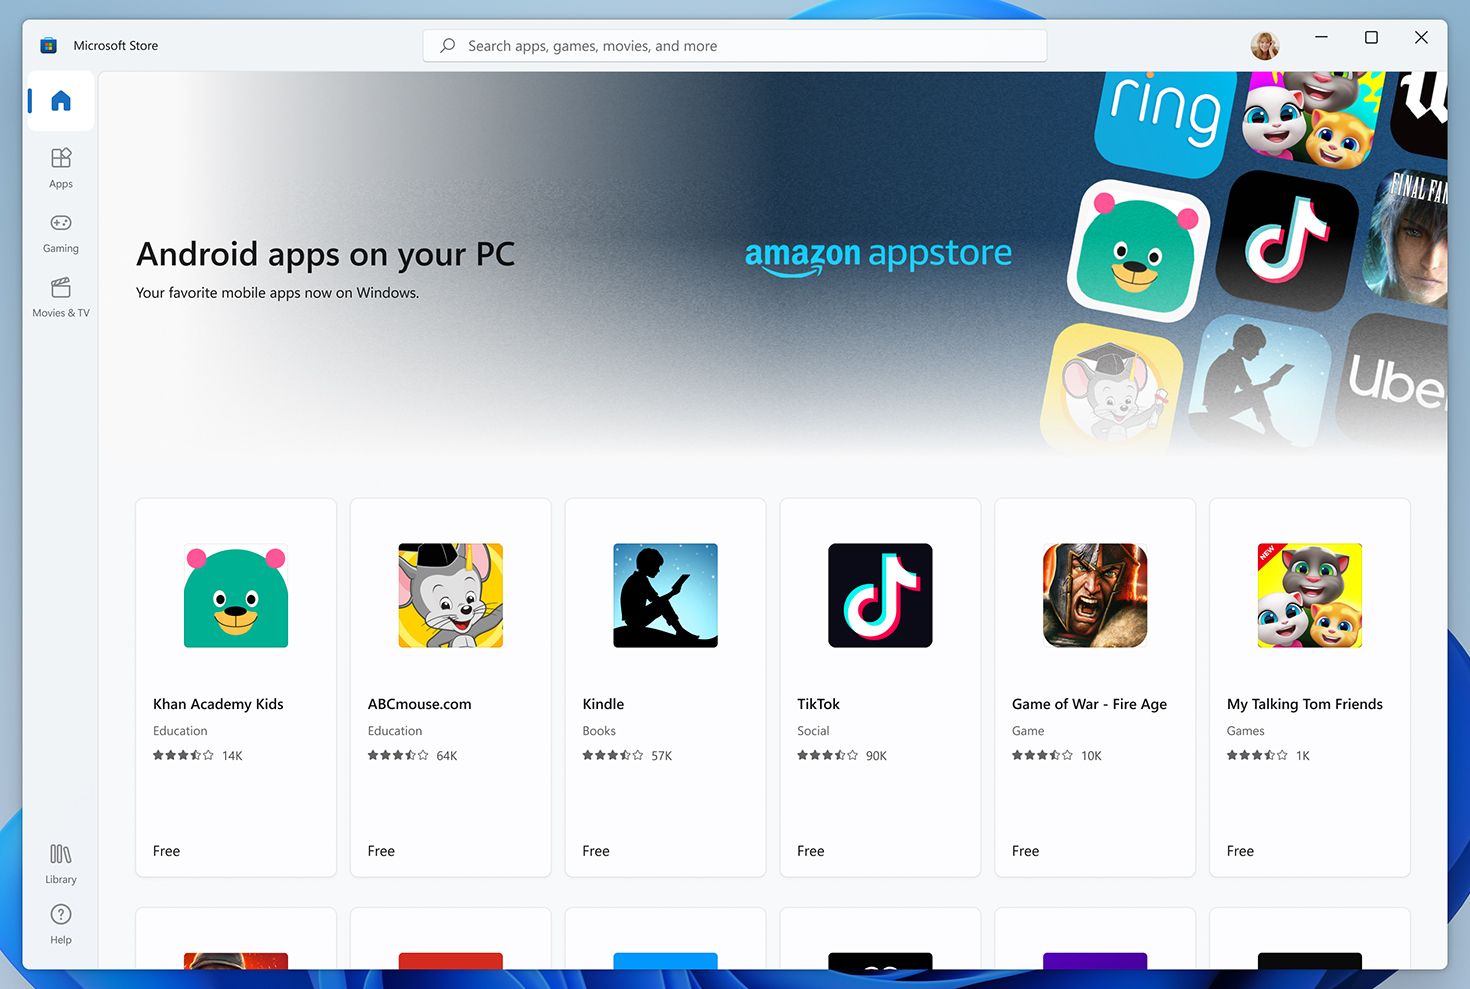 Android apps now available on Windows 11 via Amazon Appstore through the Microsoft Store